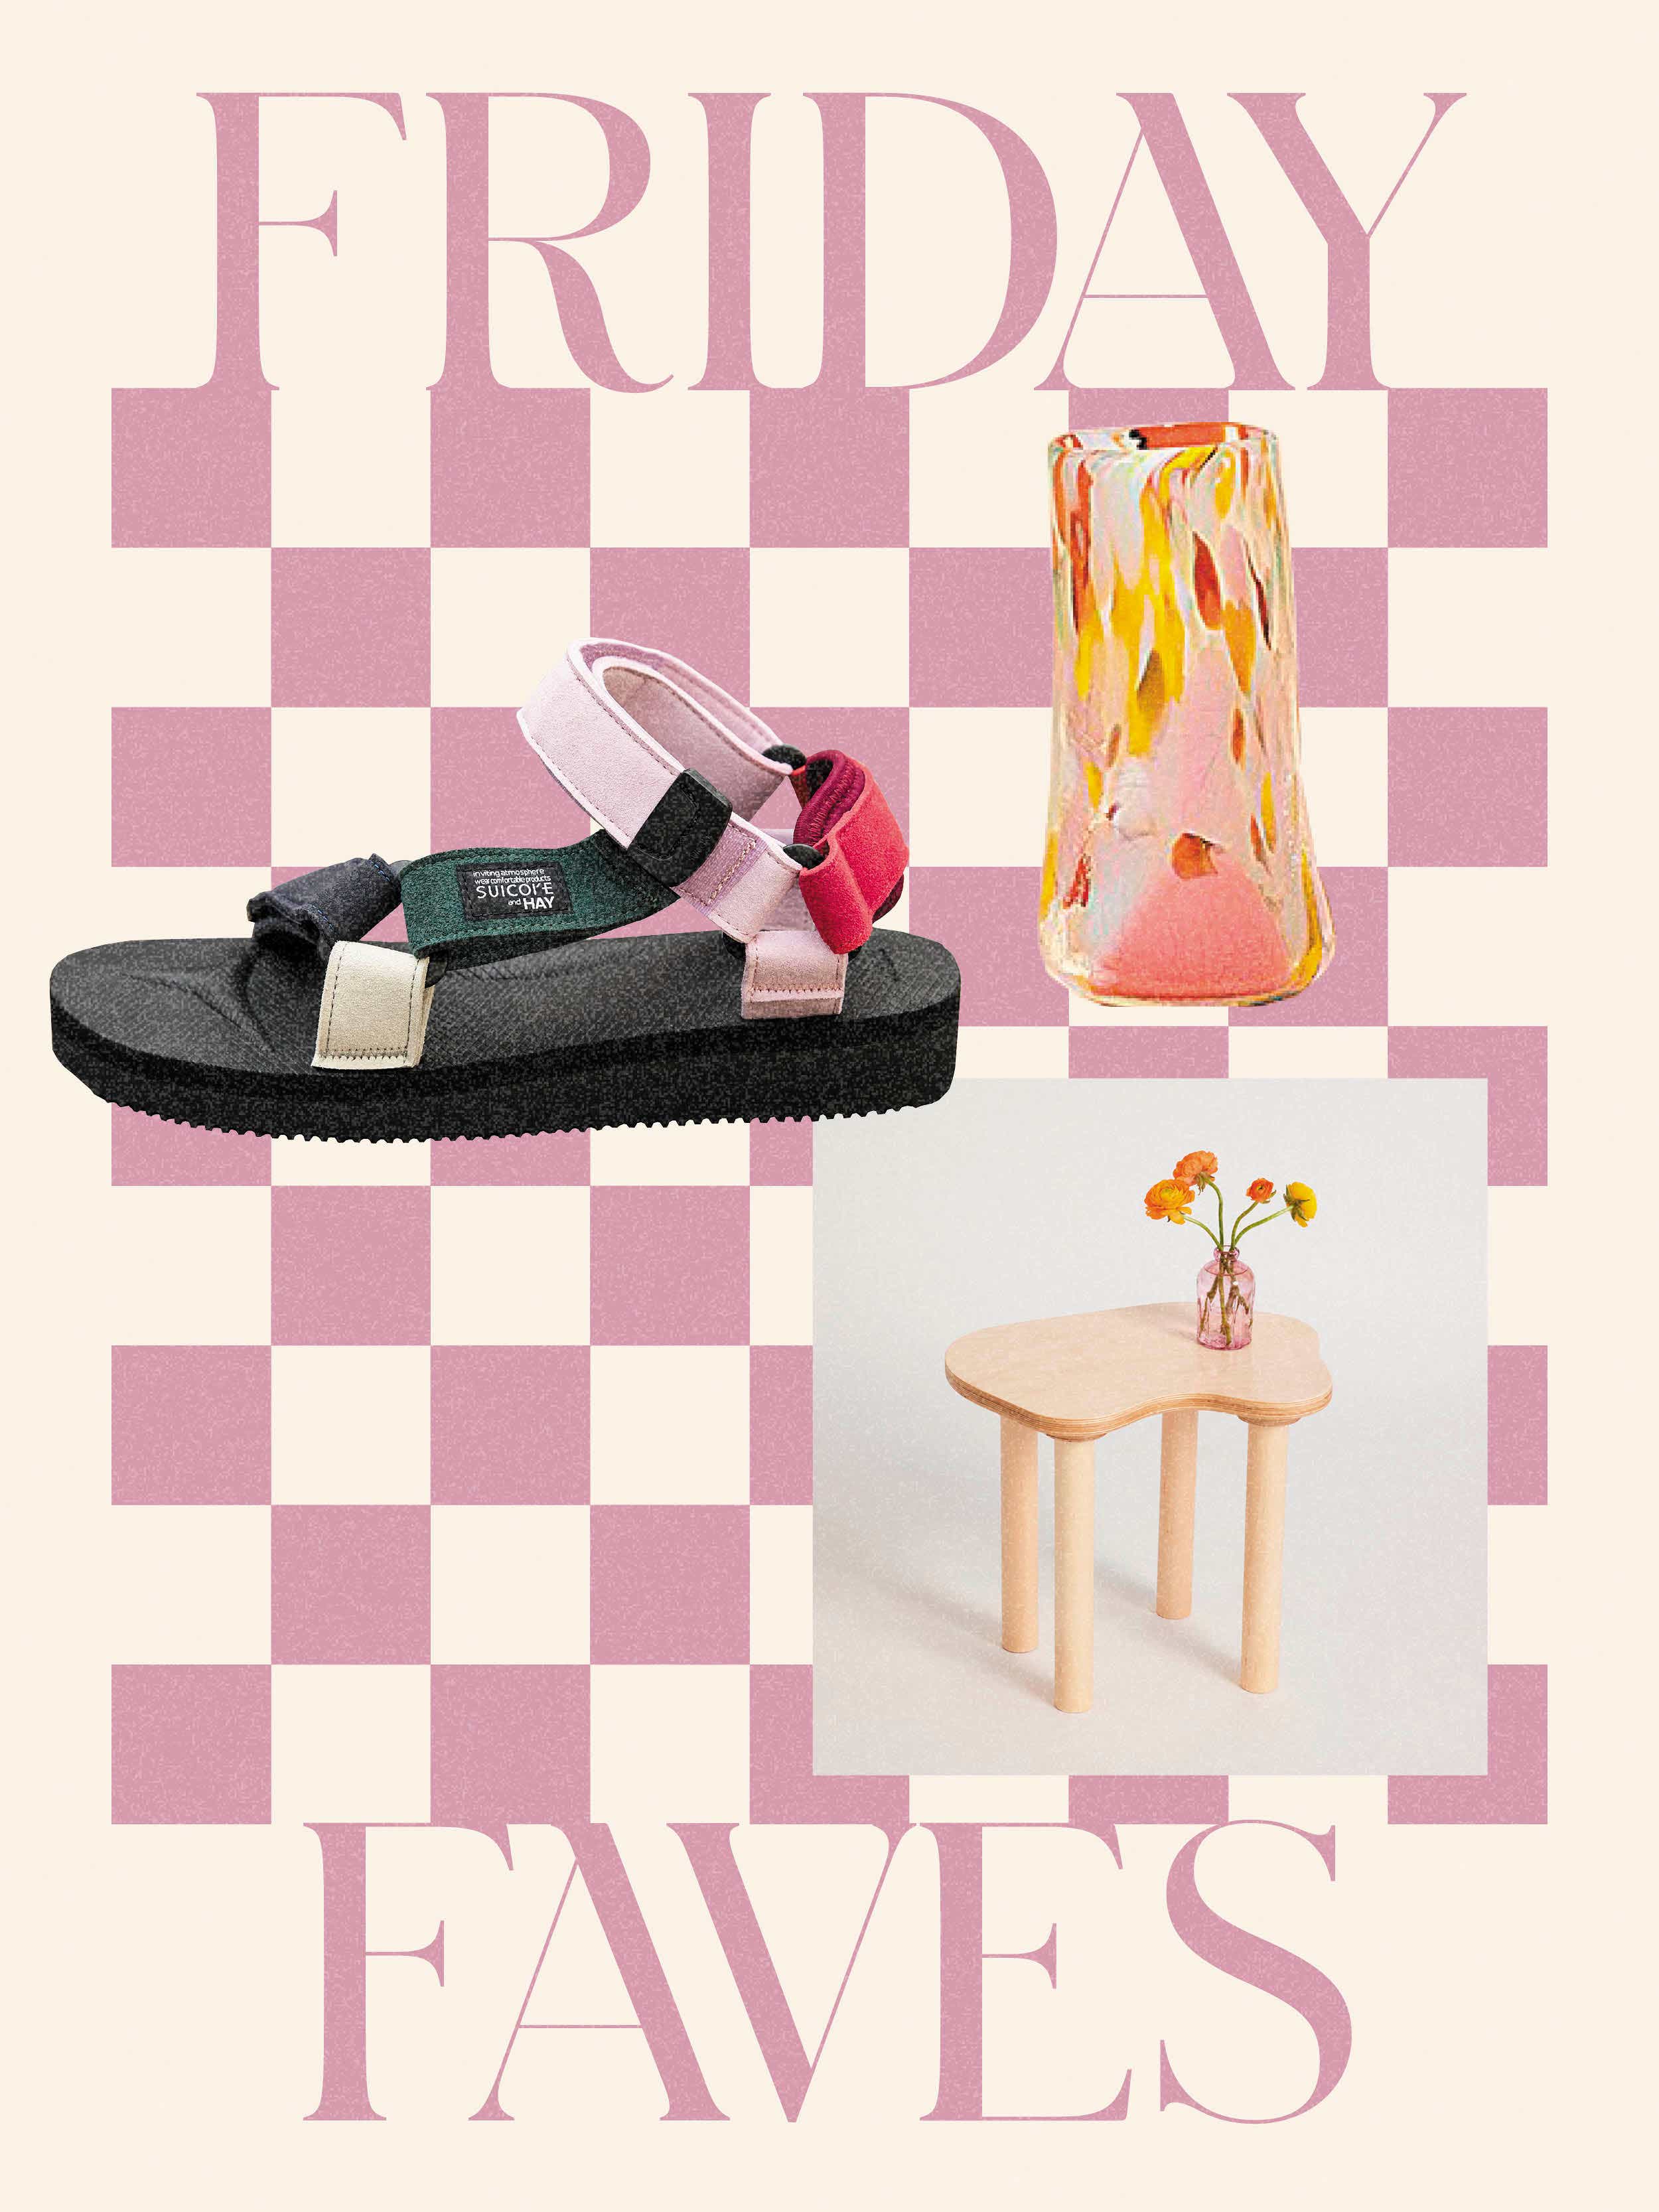 The Next It Candles, a Scandi Sandal Collab, and 4 More Things We Texted About This Week